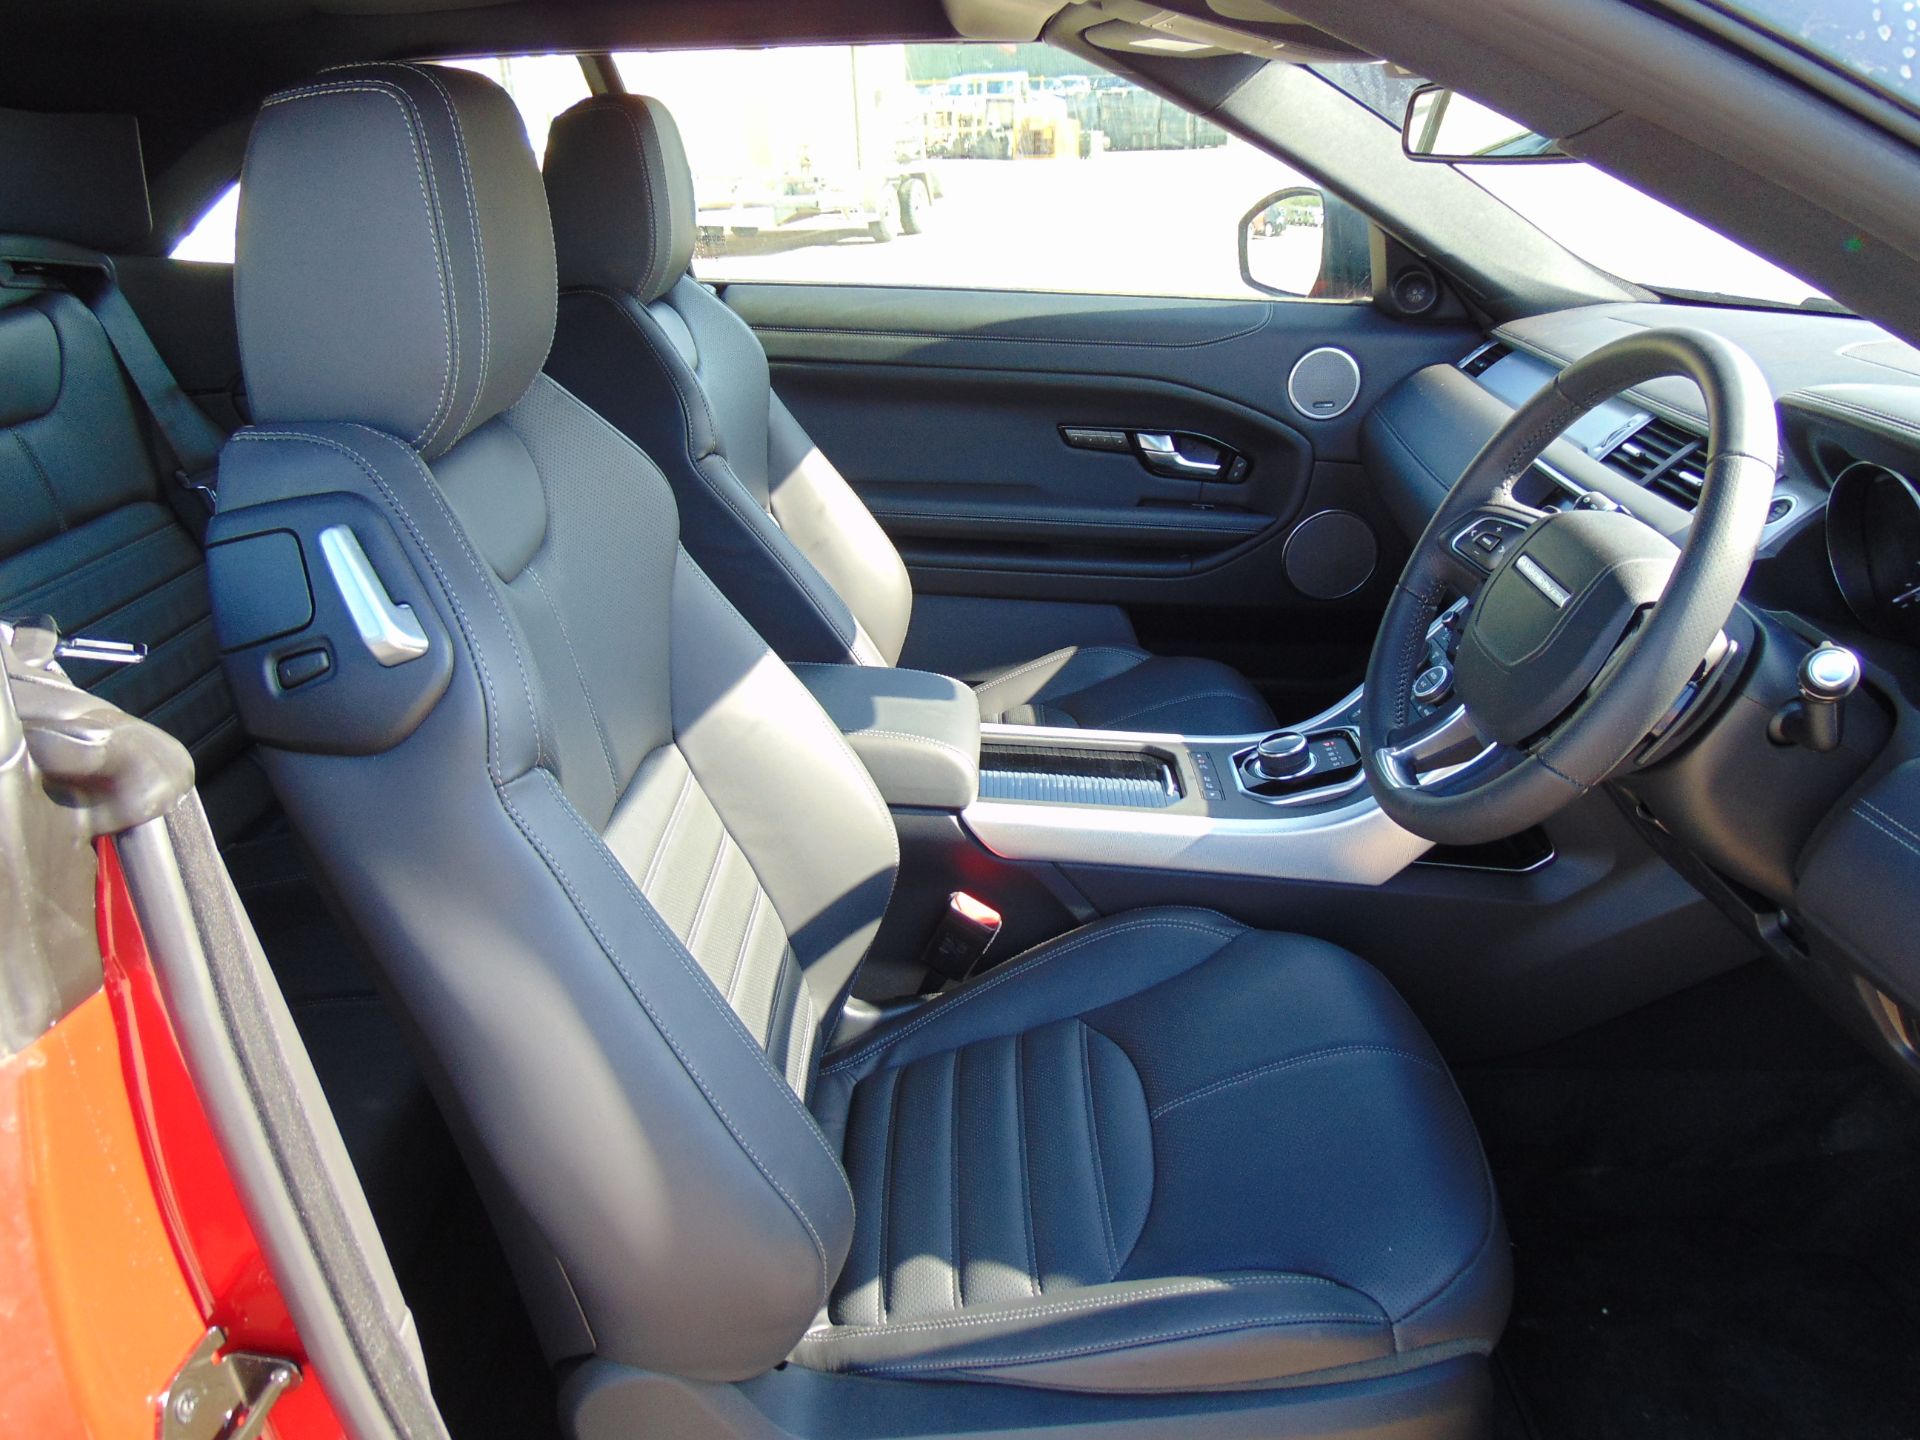 NEW UNUSED Range Rover Evoque 2.0 i4 HSE Dynamic Convertible - Image 19 of 39